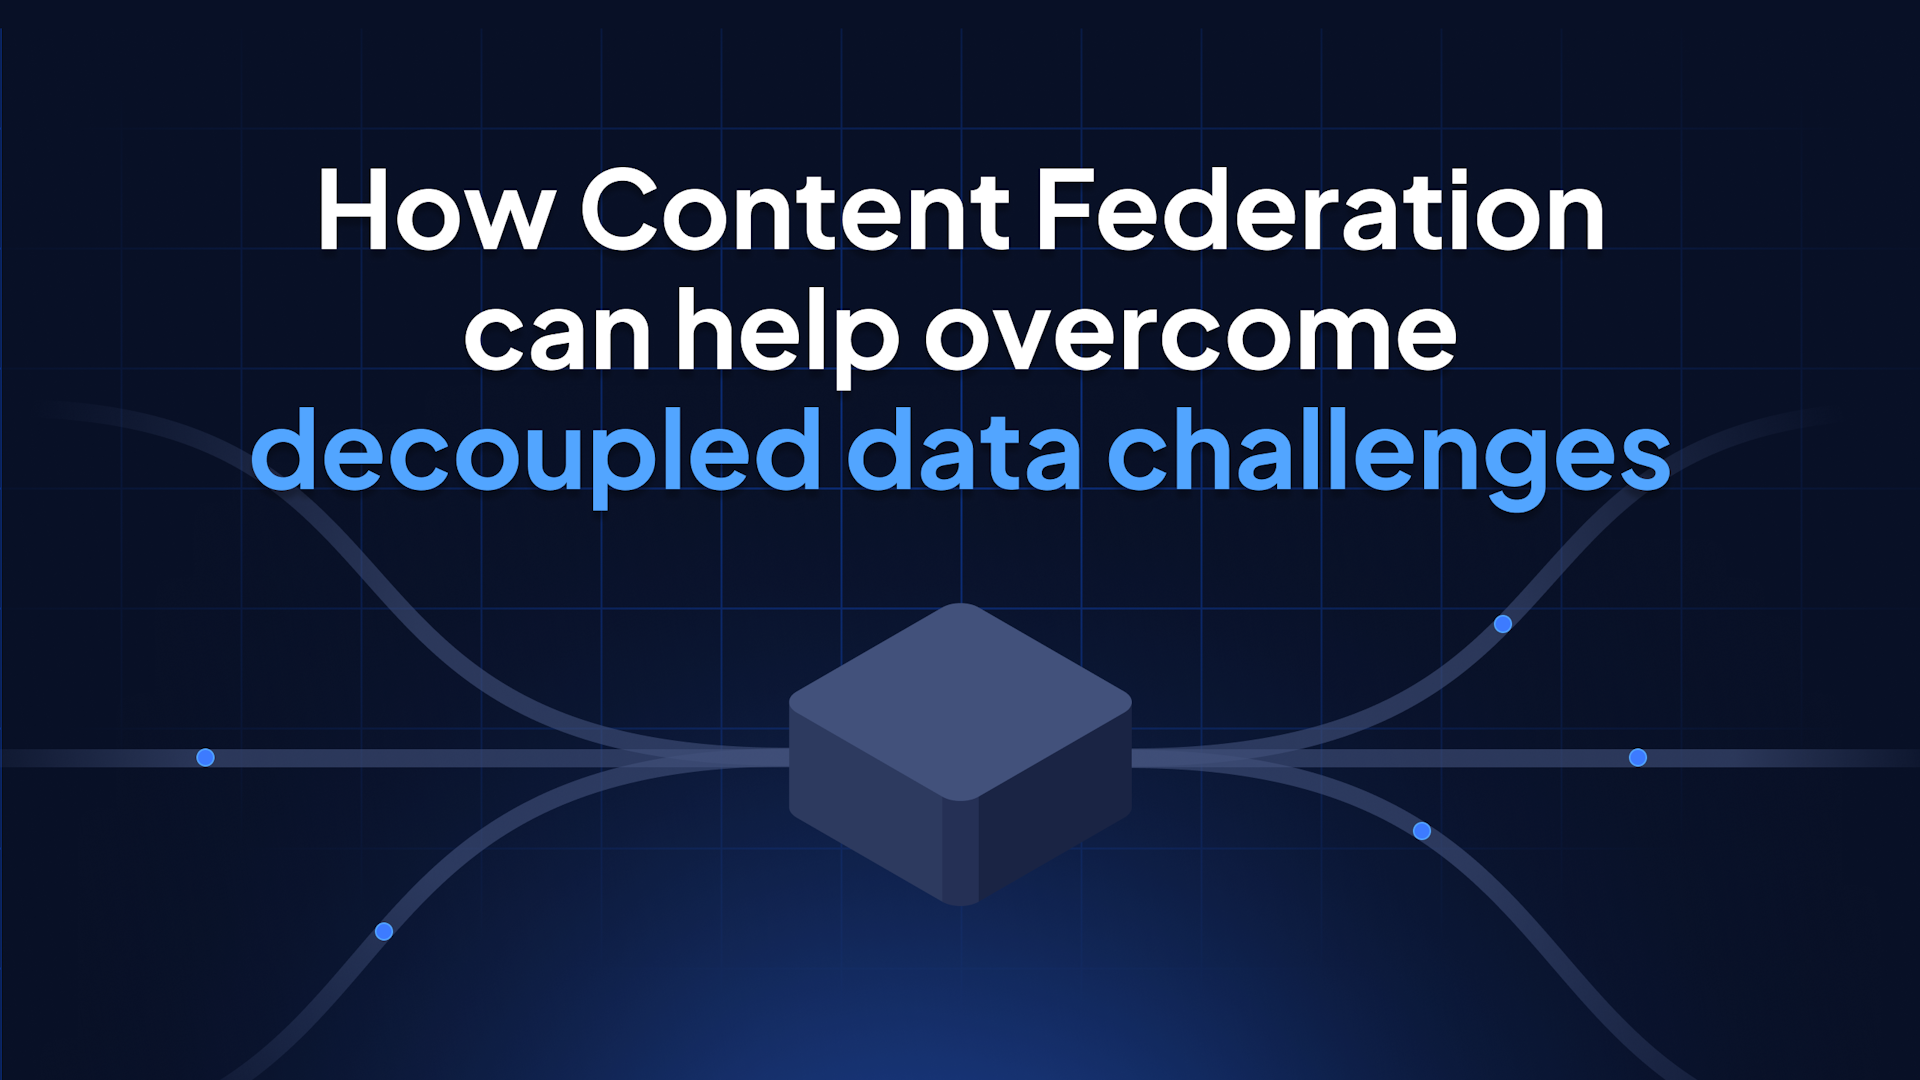 How content federation can help overcome decoupled data challenges